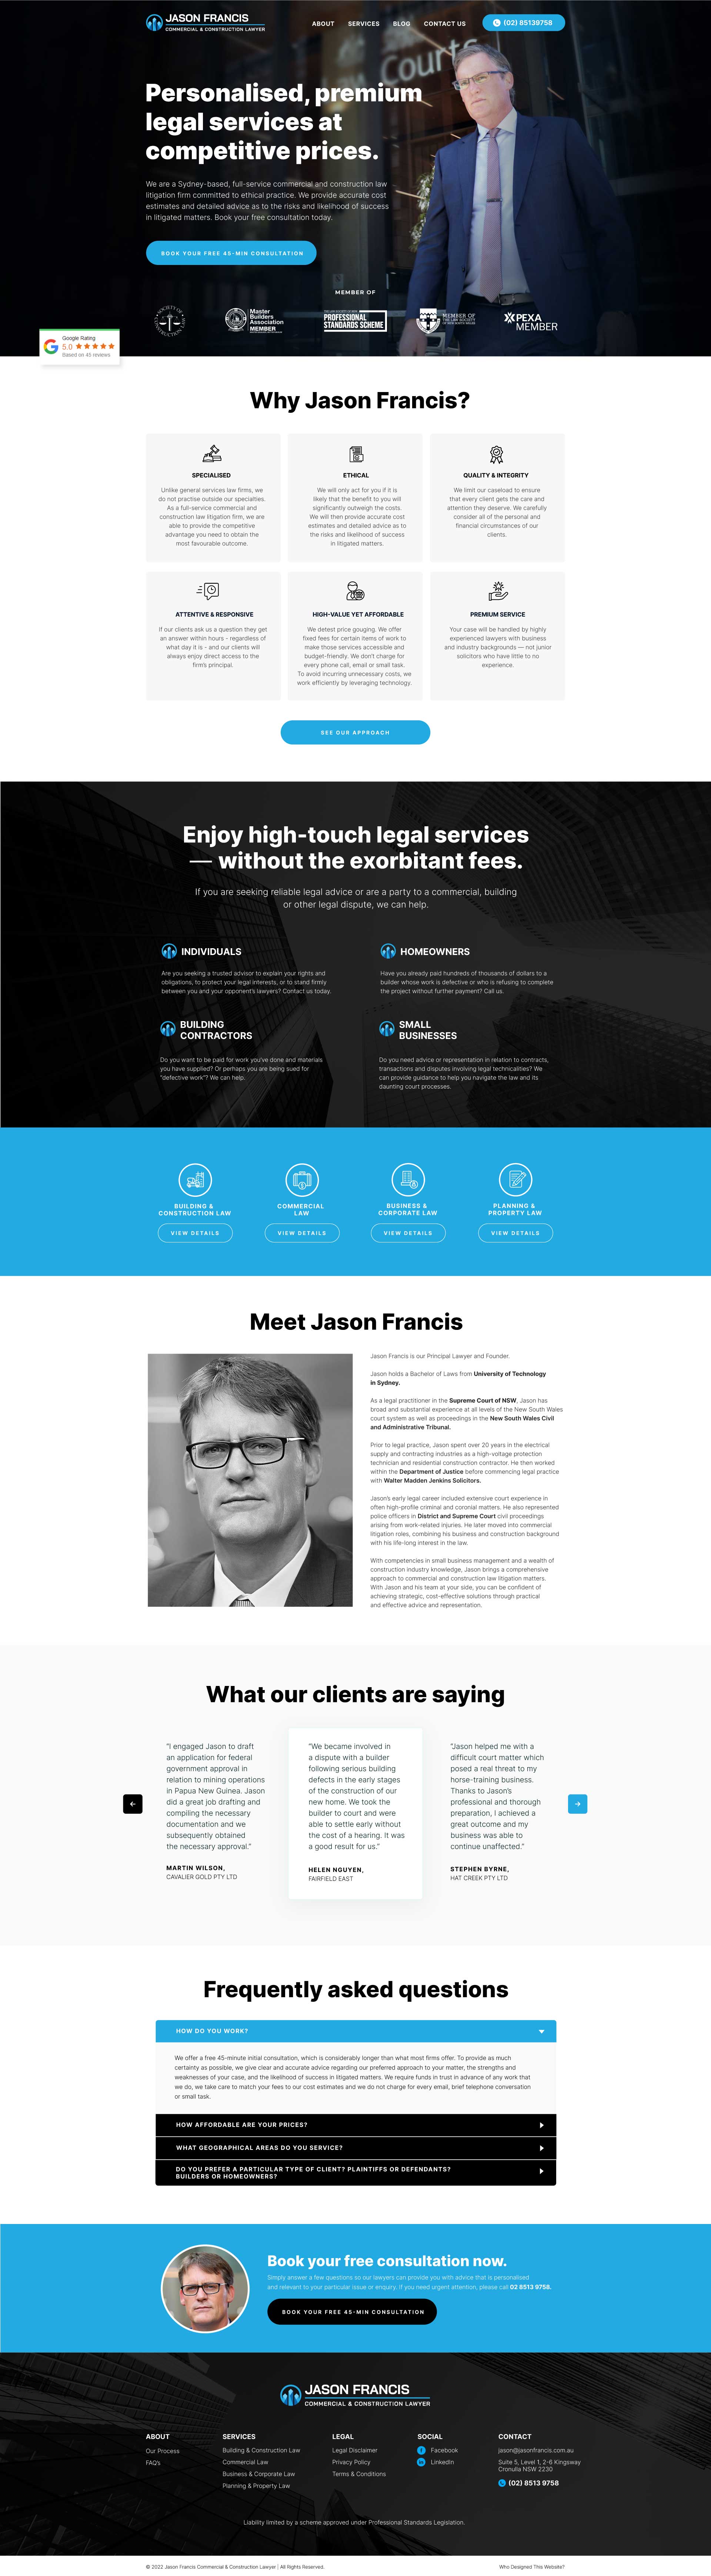 client page design example.